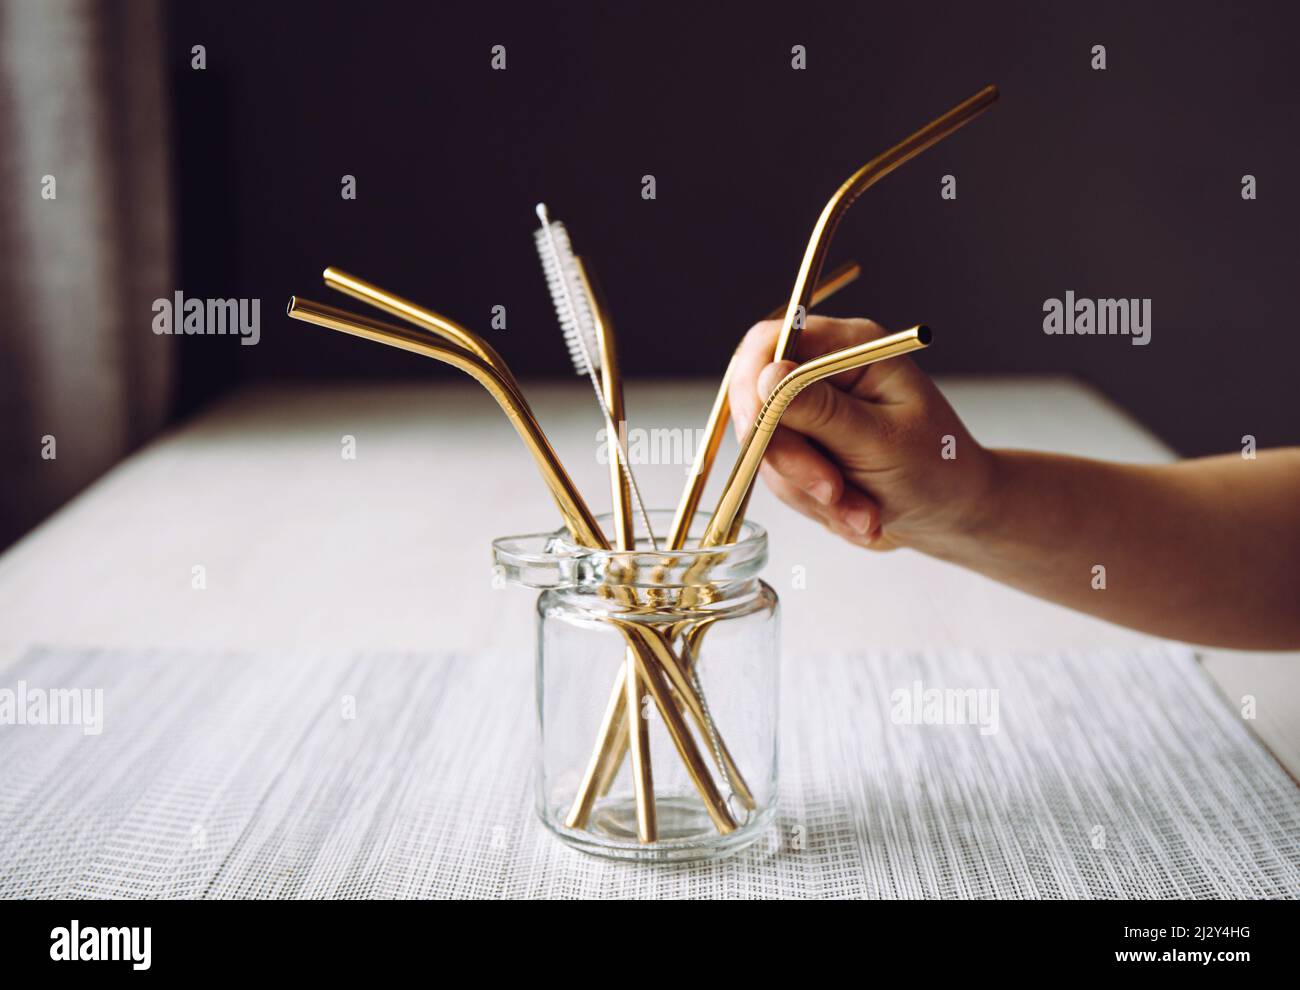 Child hand take golden metal drinking straw from glass jar in home kitchen. Sustainable lifestyle concept. Stock Photo